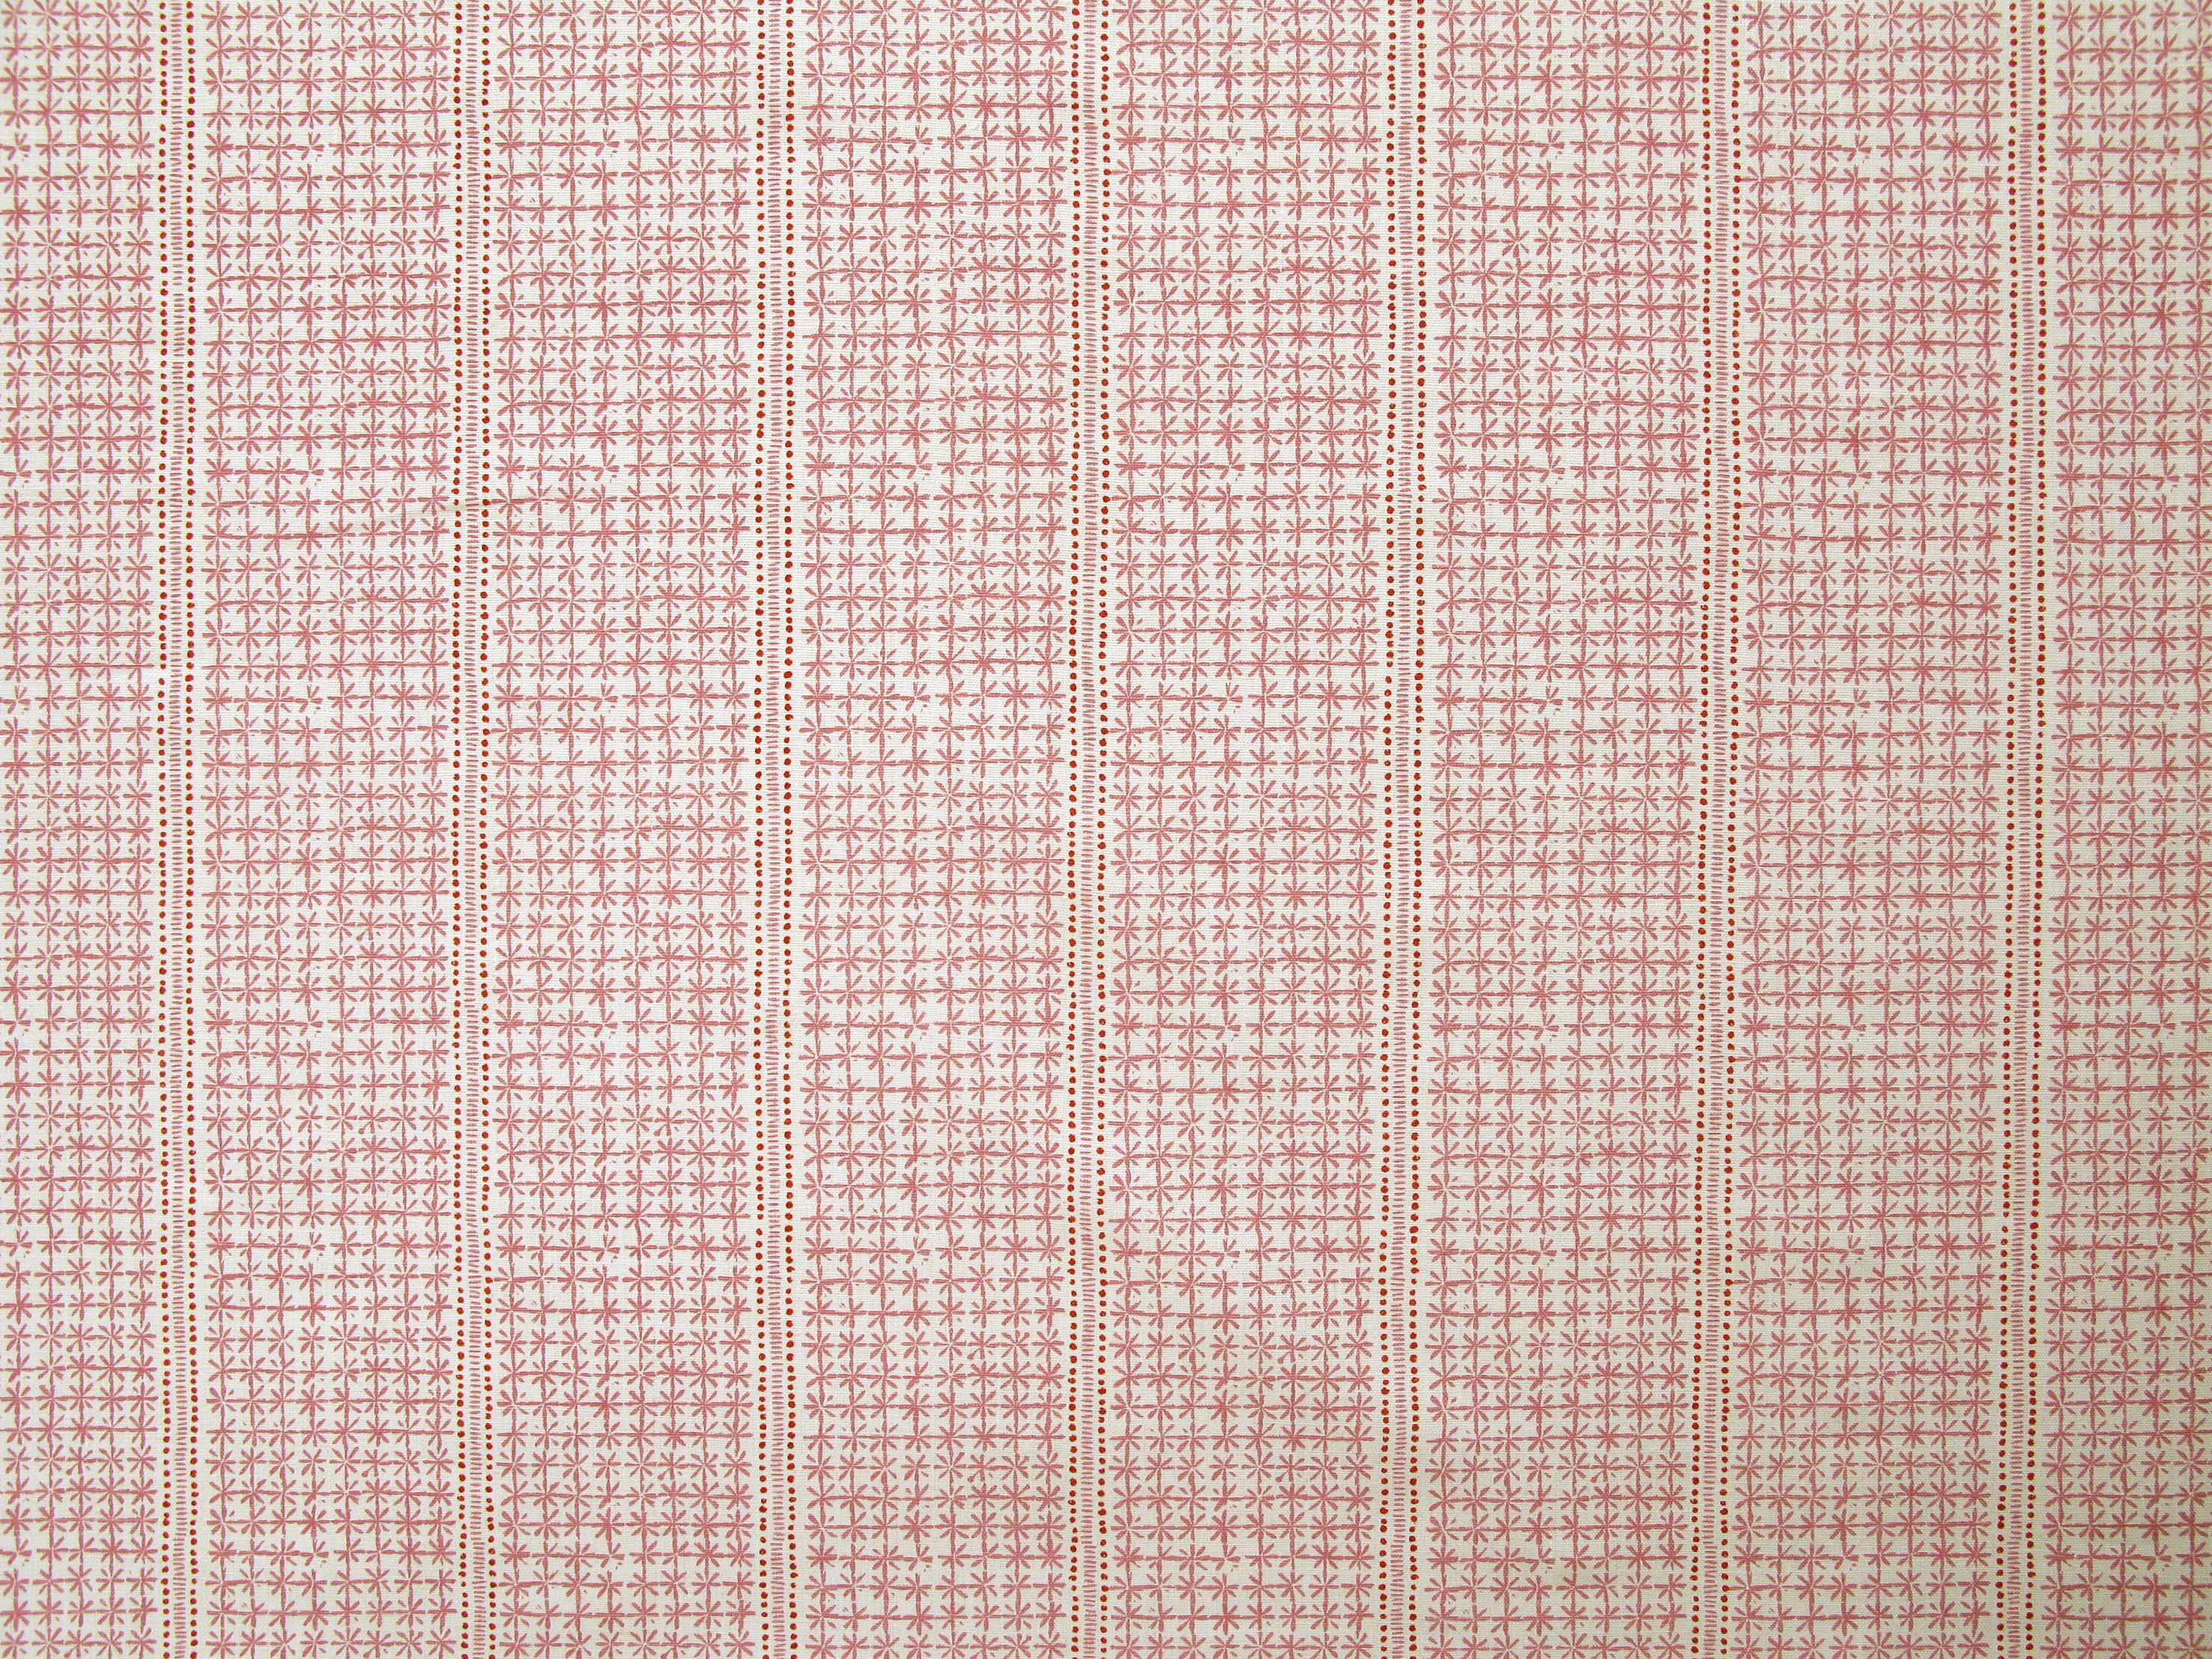 Detail of fabric in a dense repeating stripe and star print in pink on a cream field.